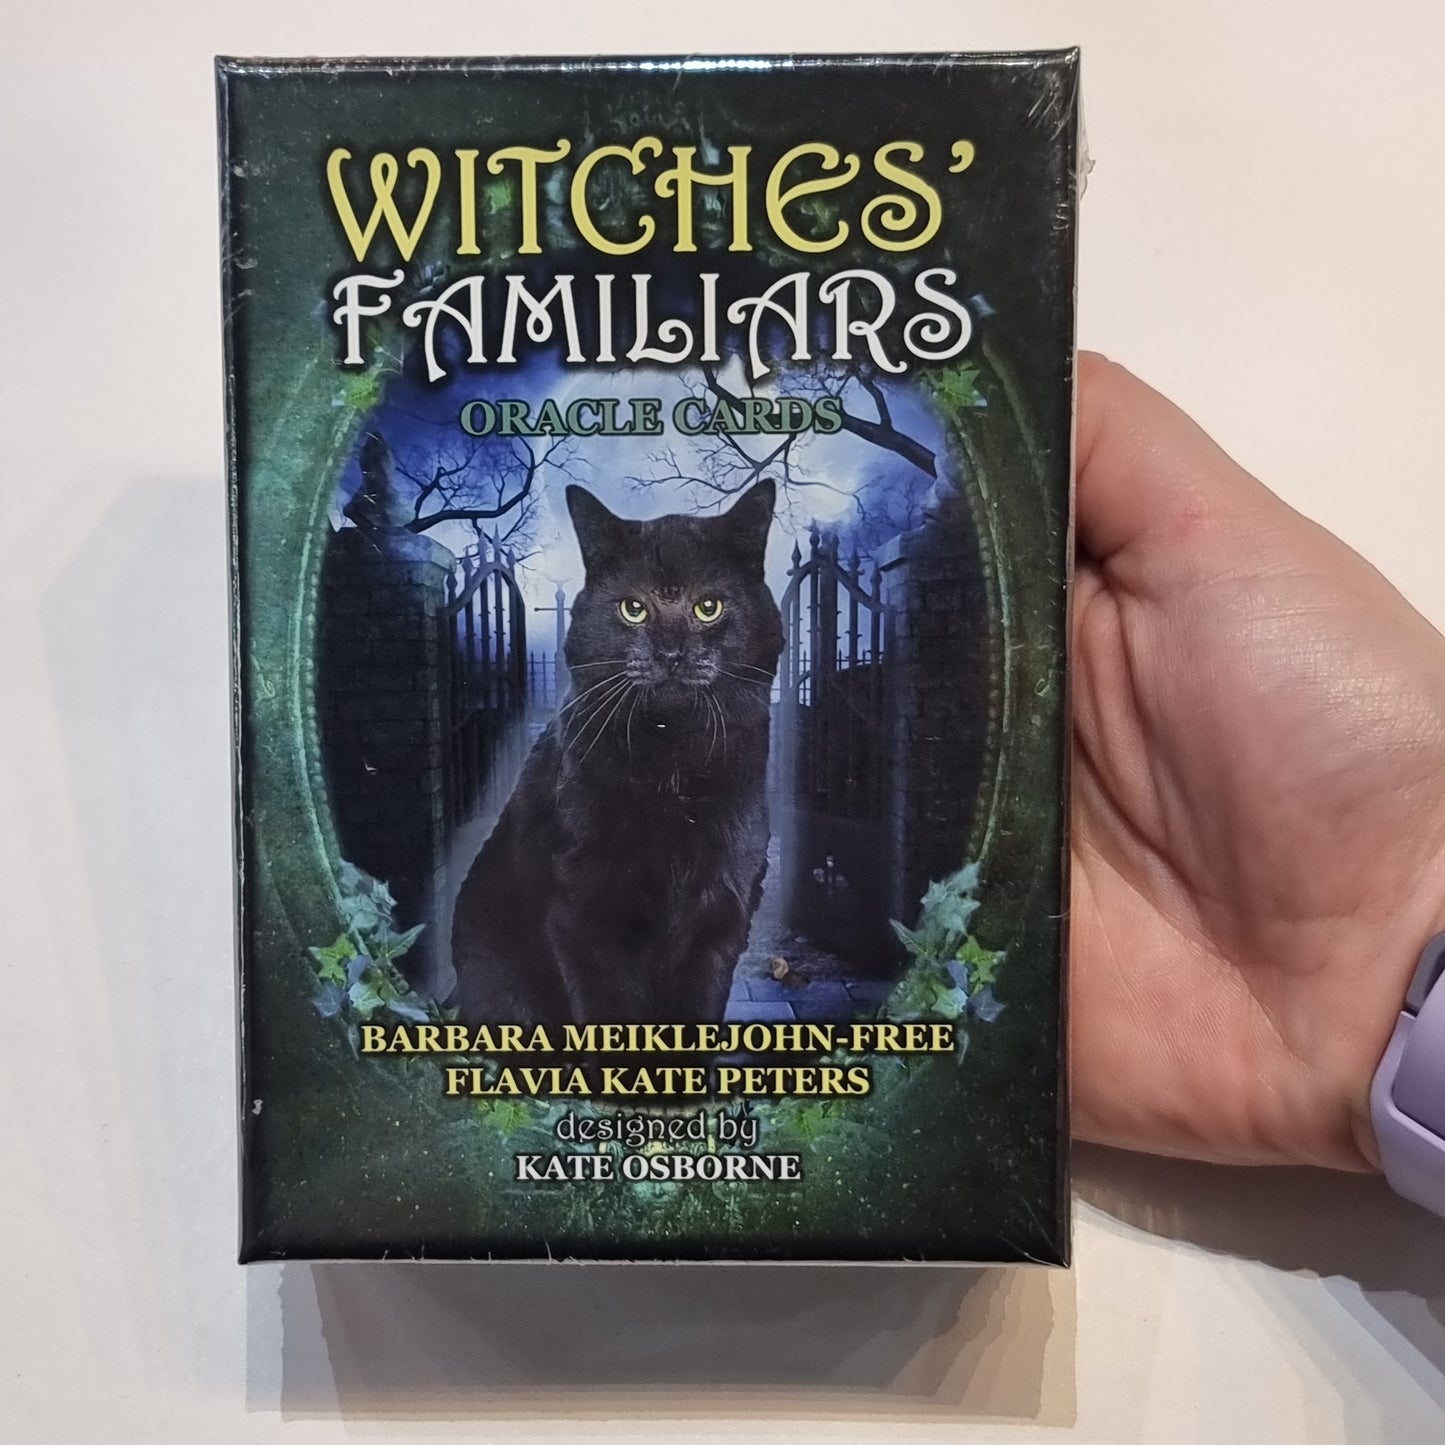 Witches familiar oracle - Rivendell Shop